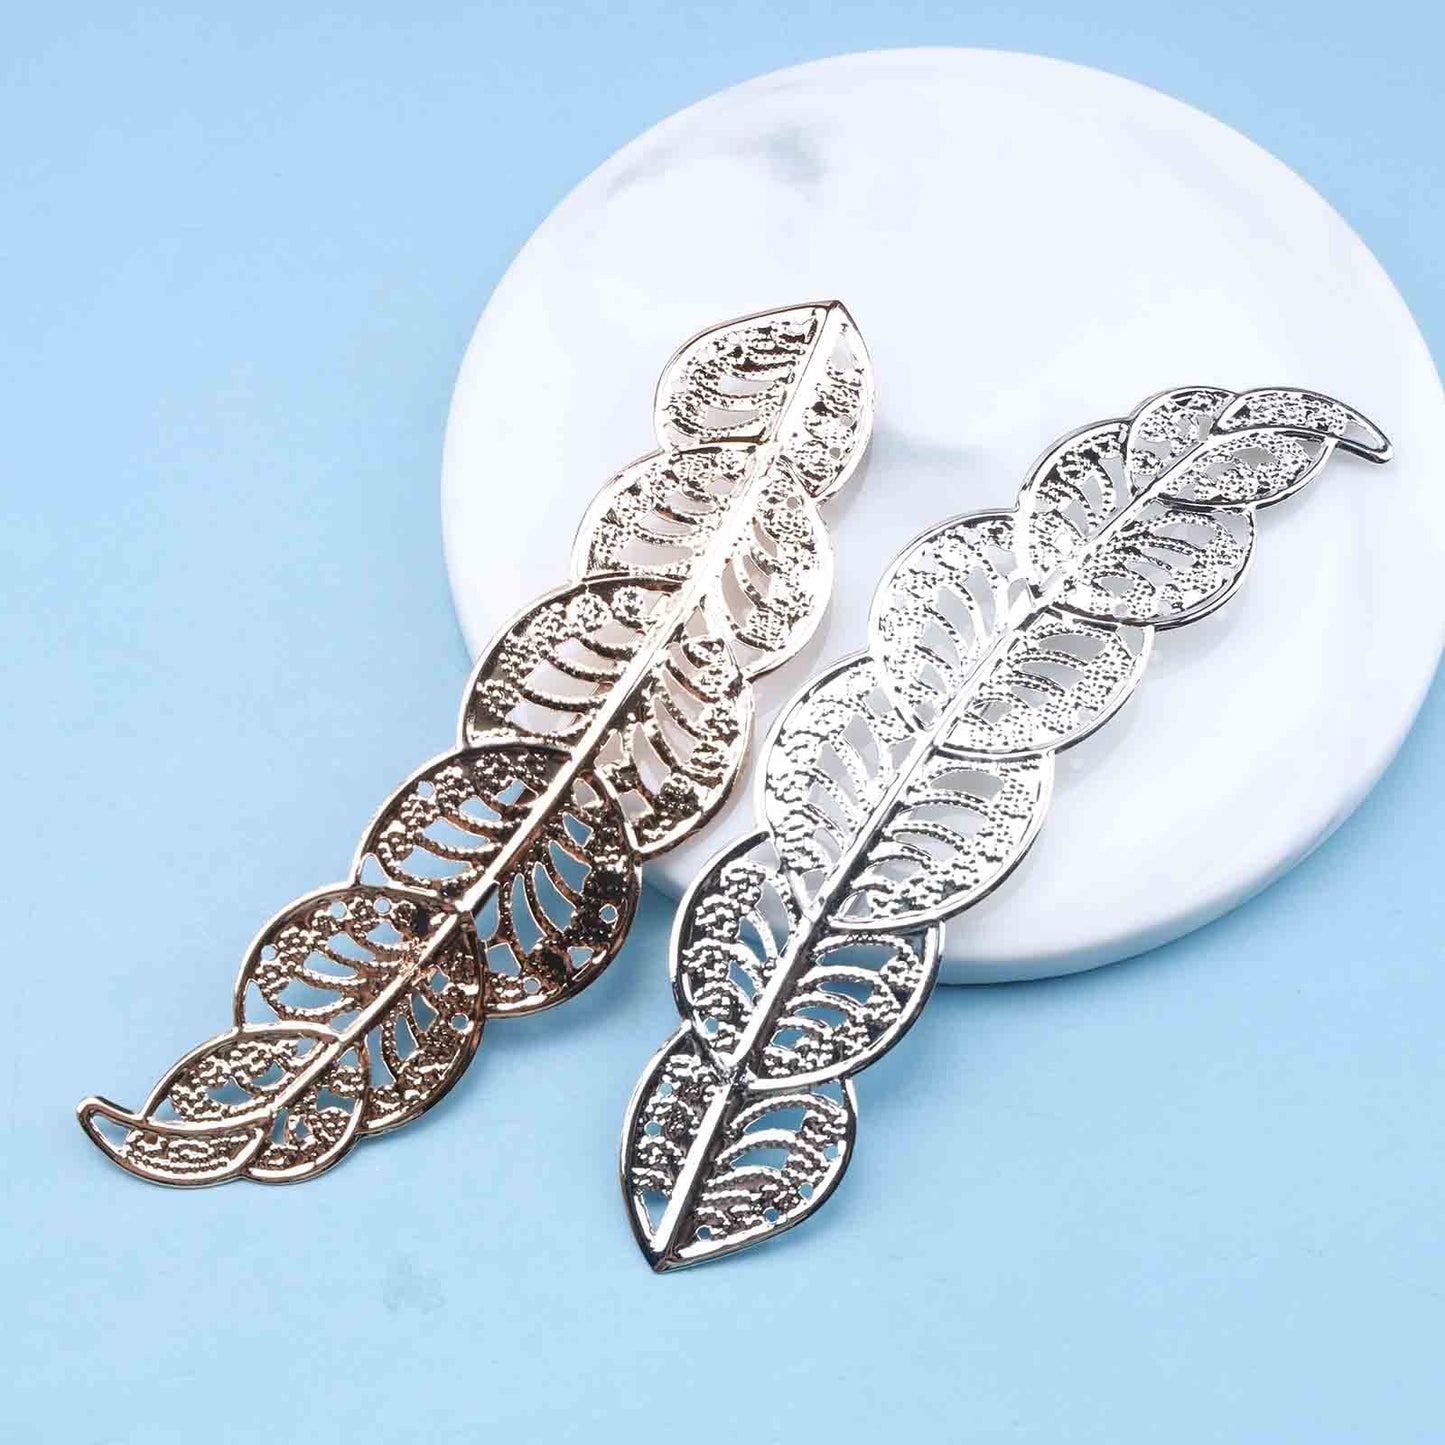 Yheakne Boho Leaf Hair Clip Metal Leaf Hairclips Barrette Gold Vintage Hair Barrette Pins Decorative Bobby Pin Alloy Minimalist Hair Accessories for Women and Girls Gifts (Gold)